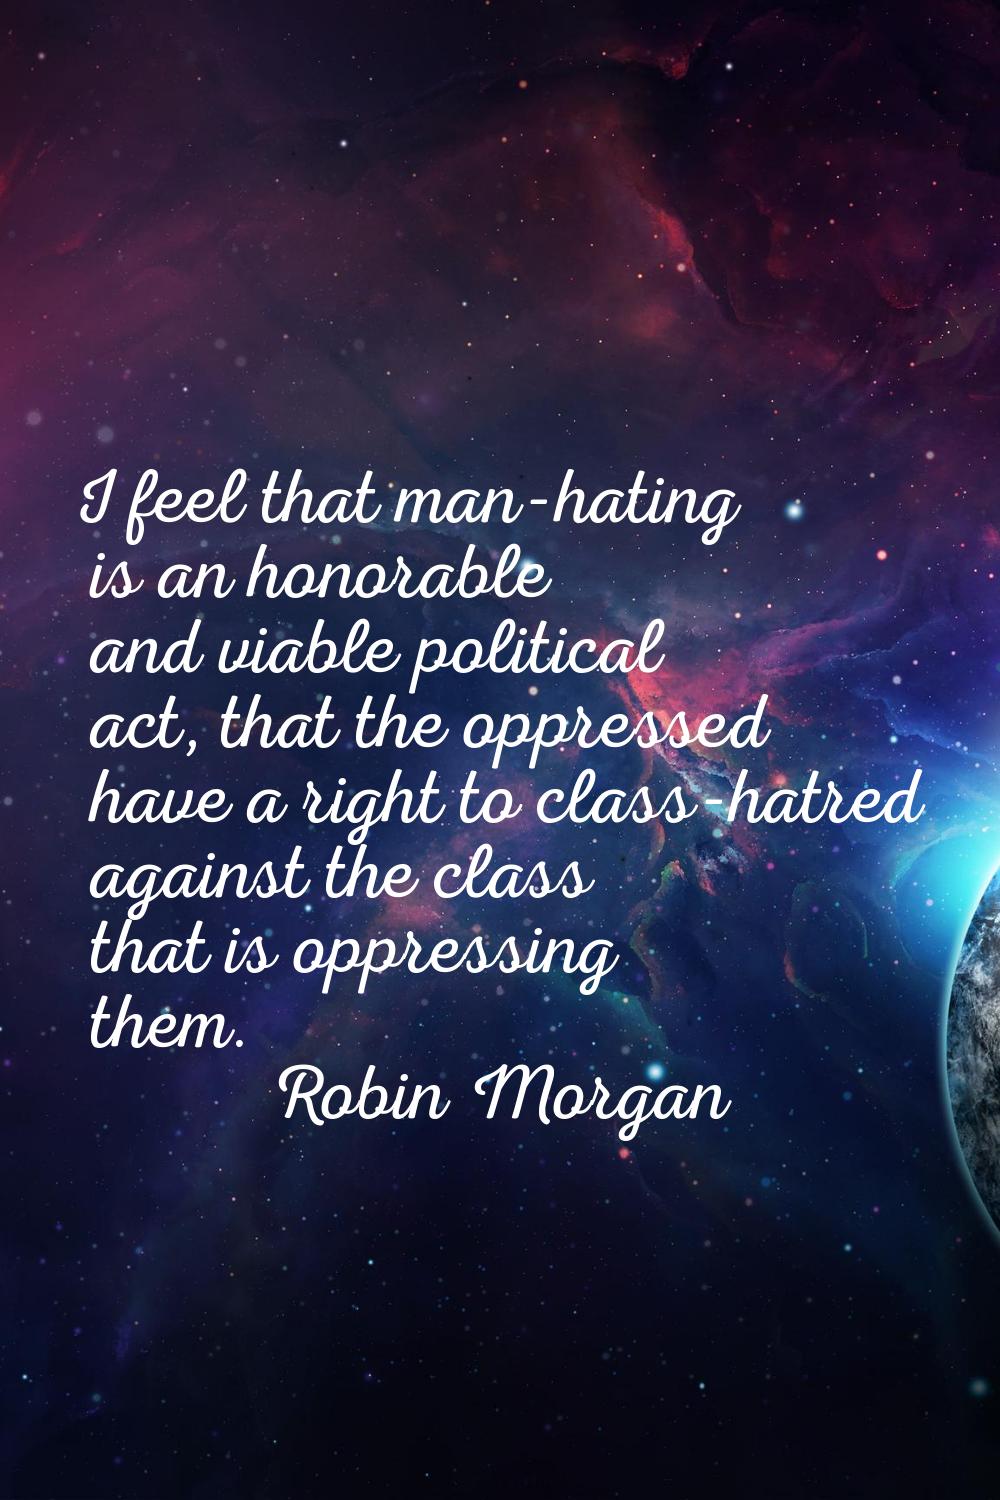 I feel that man-hating is an honorable and viable political act, that the oppressed have a right to